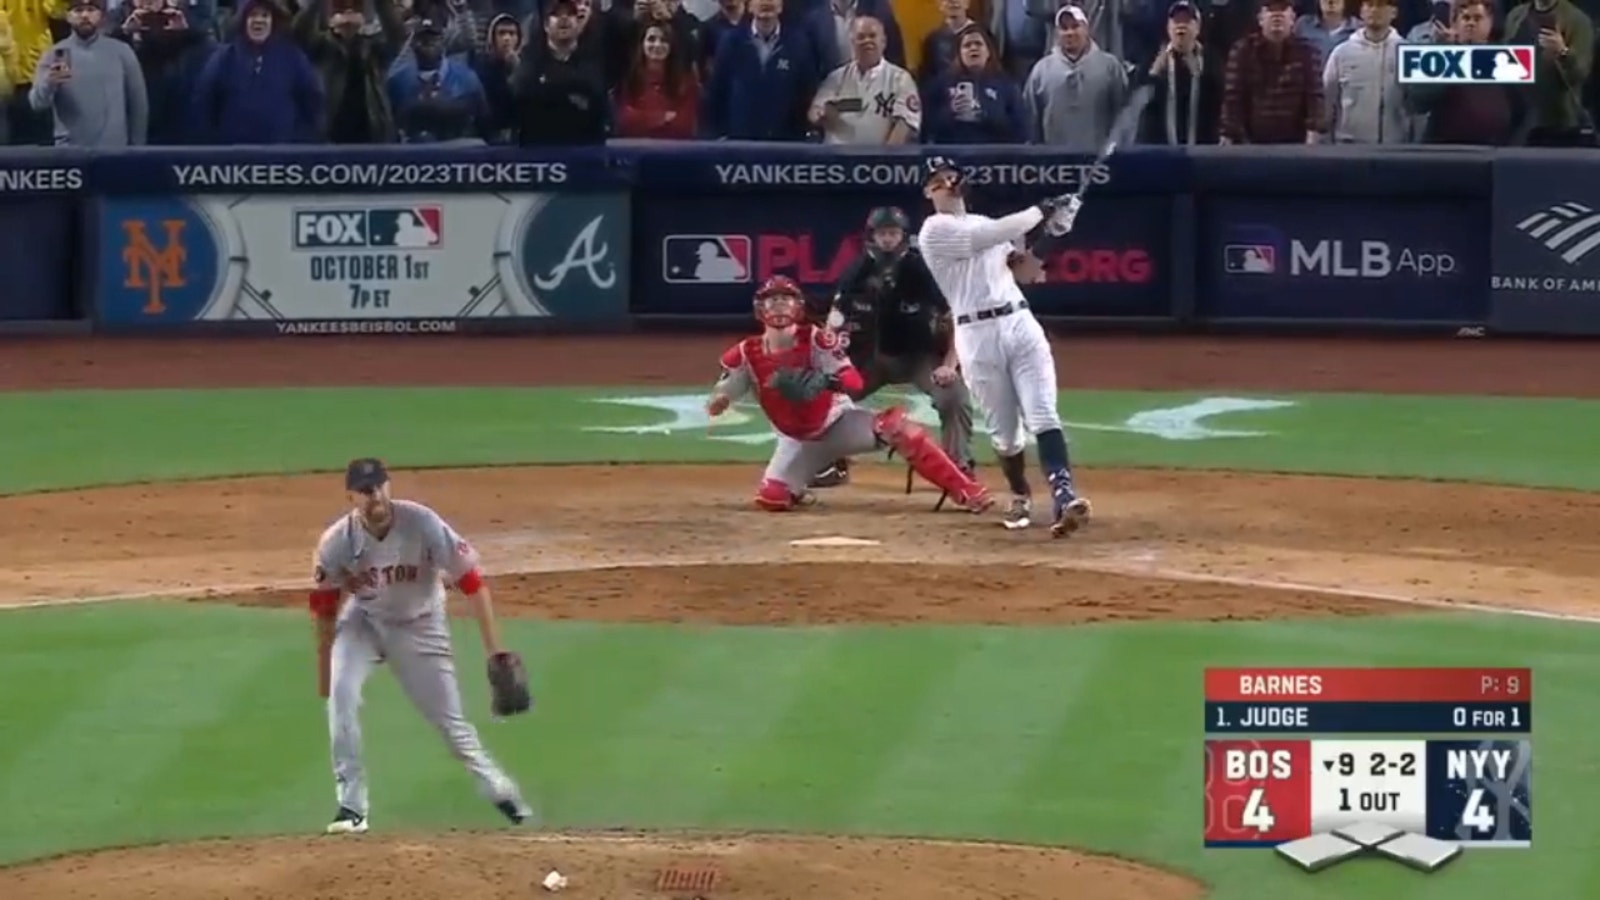 Yankees' Aaron Judge was this close to Roger Maris' AL HR record